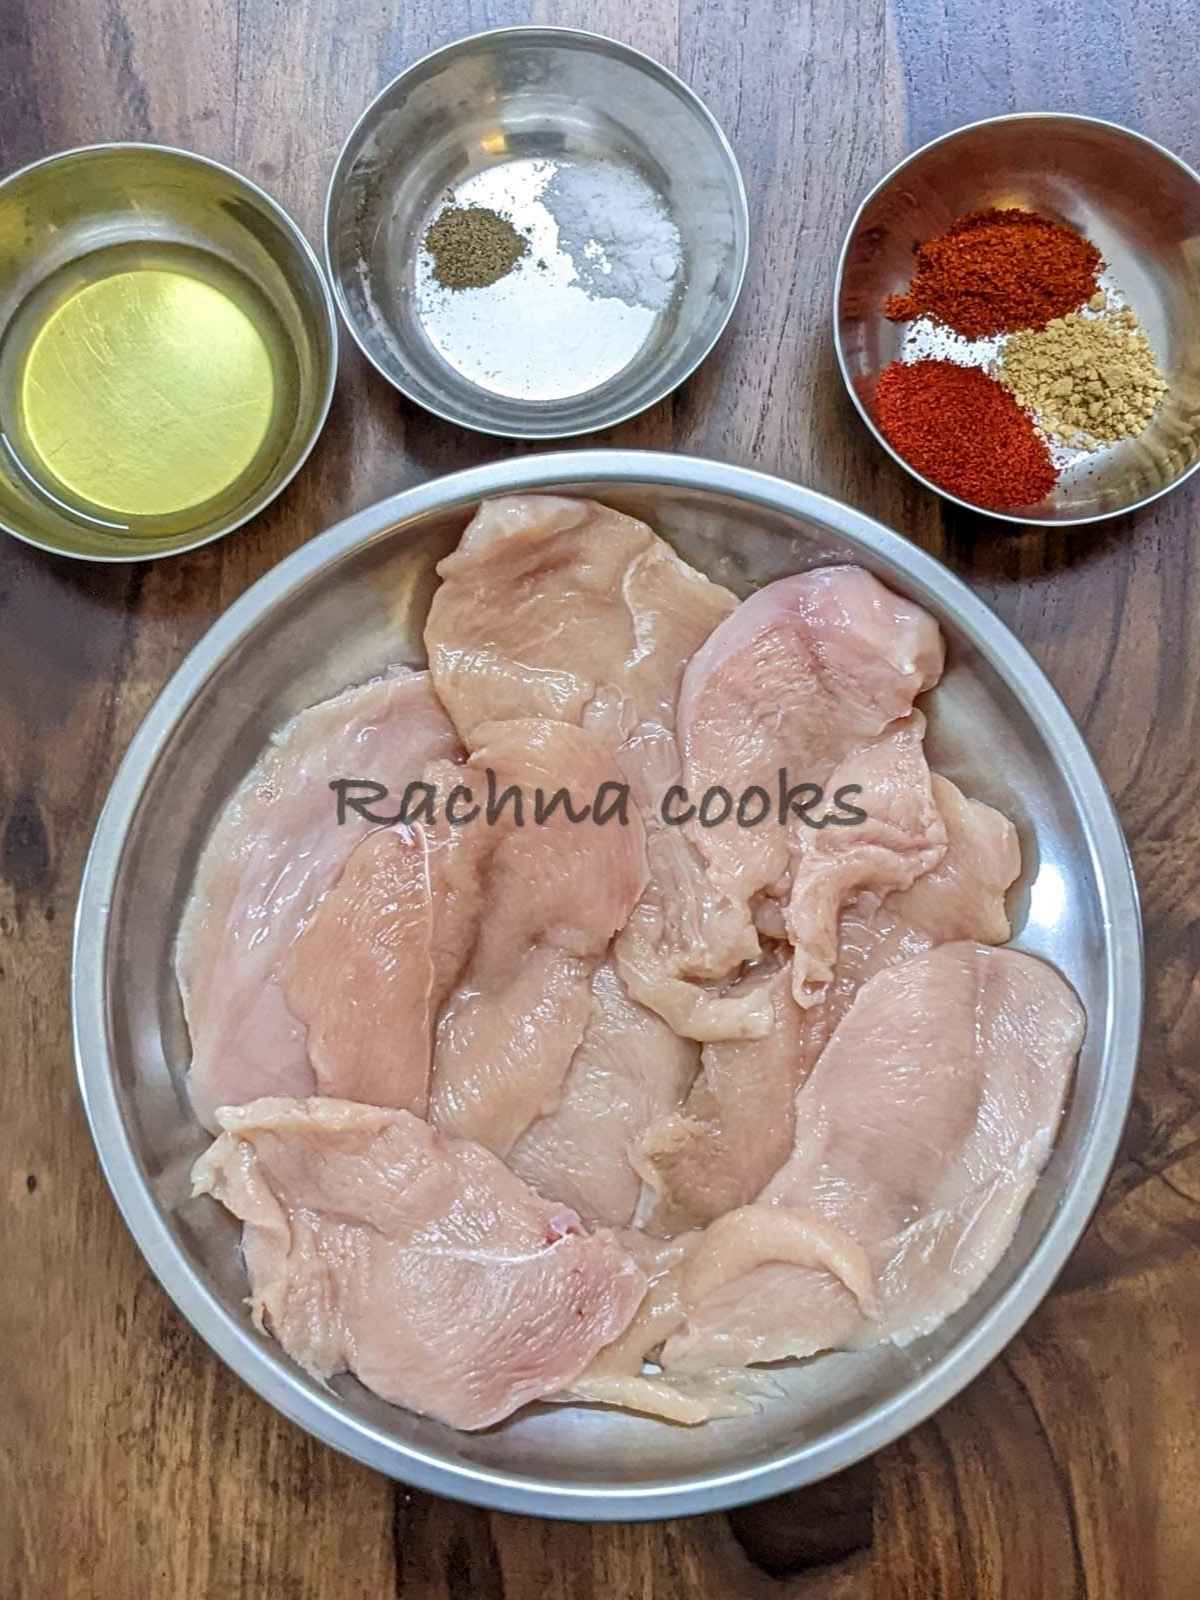 Ingredients for making BBQ chicken breast are assembled: chicken breasts, spices and olive oil in different bowls.